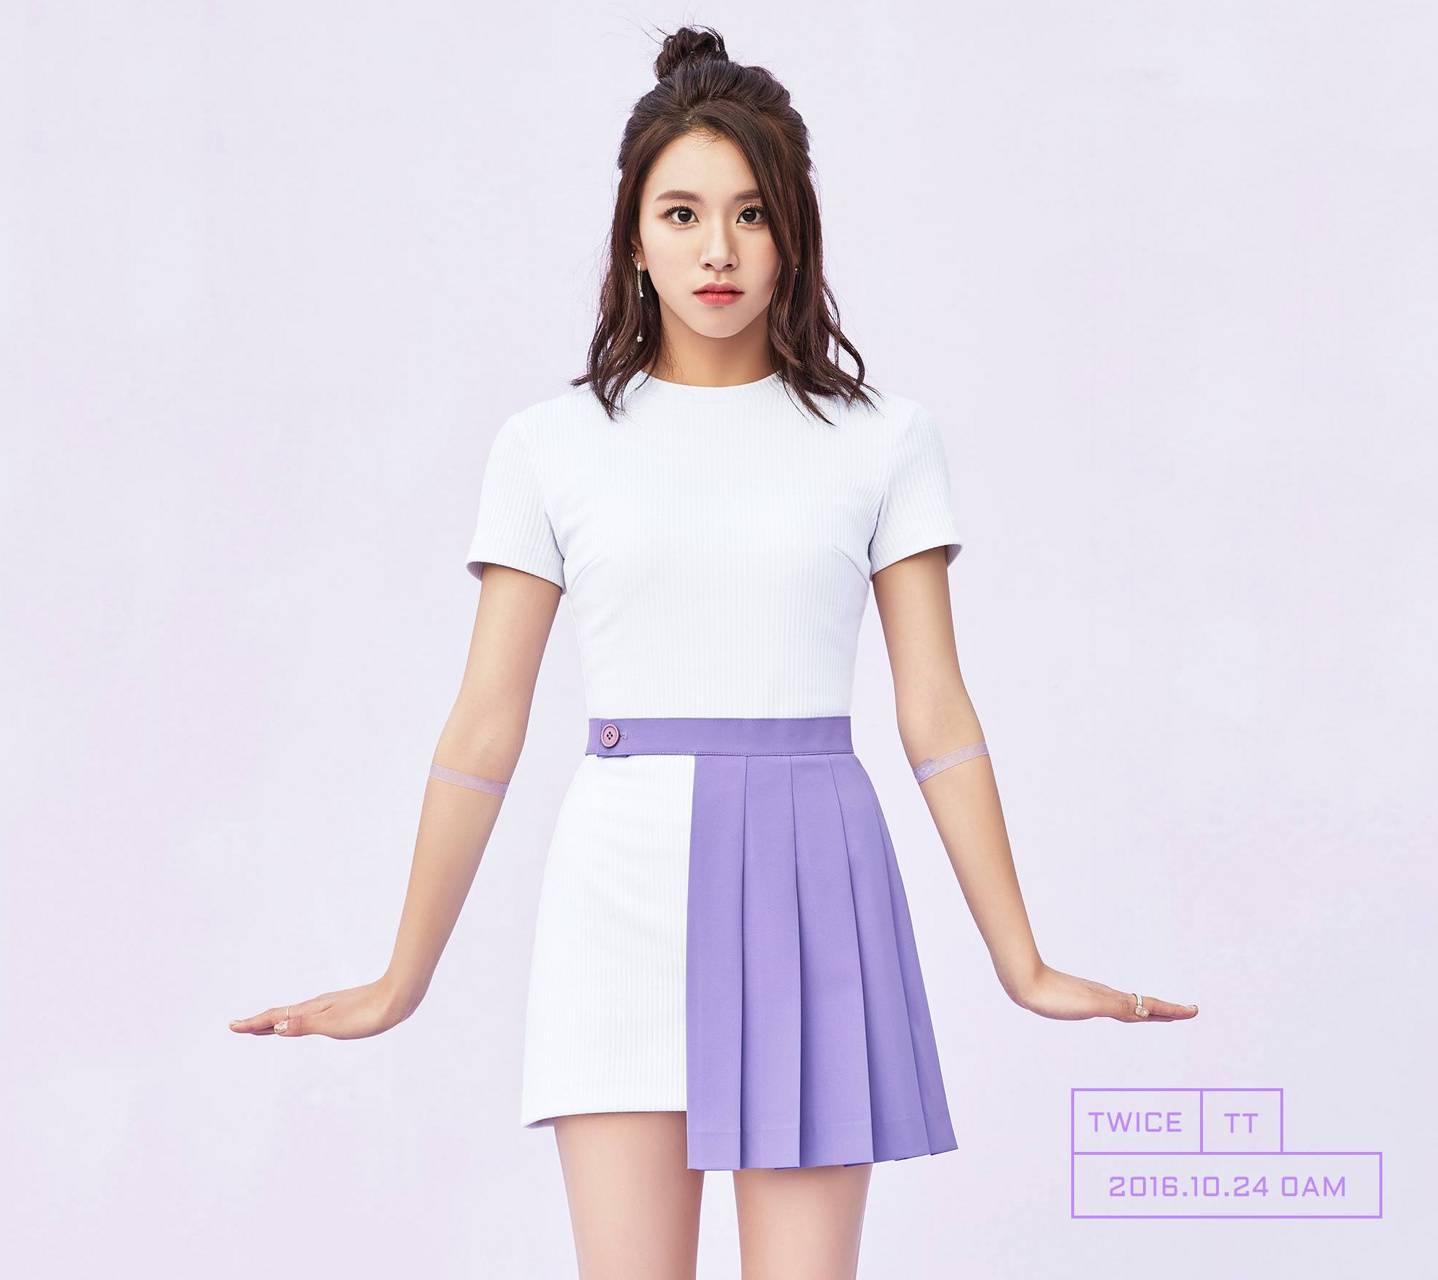 TWICE Chaeyoung wallpaper